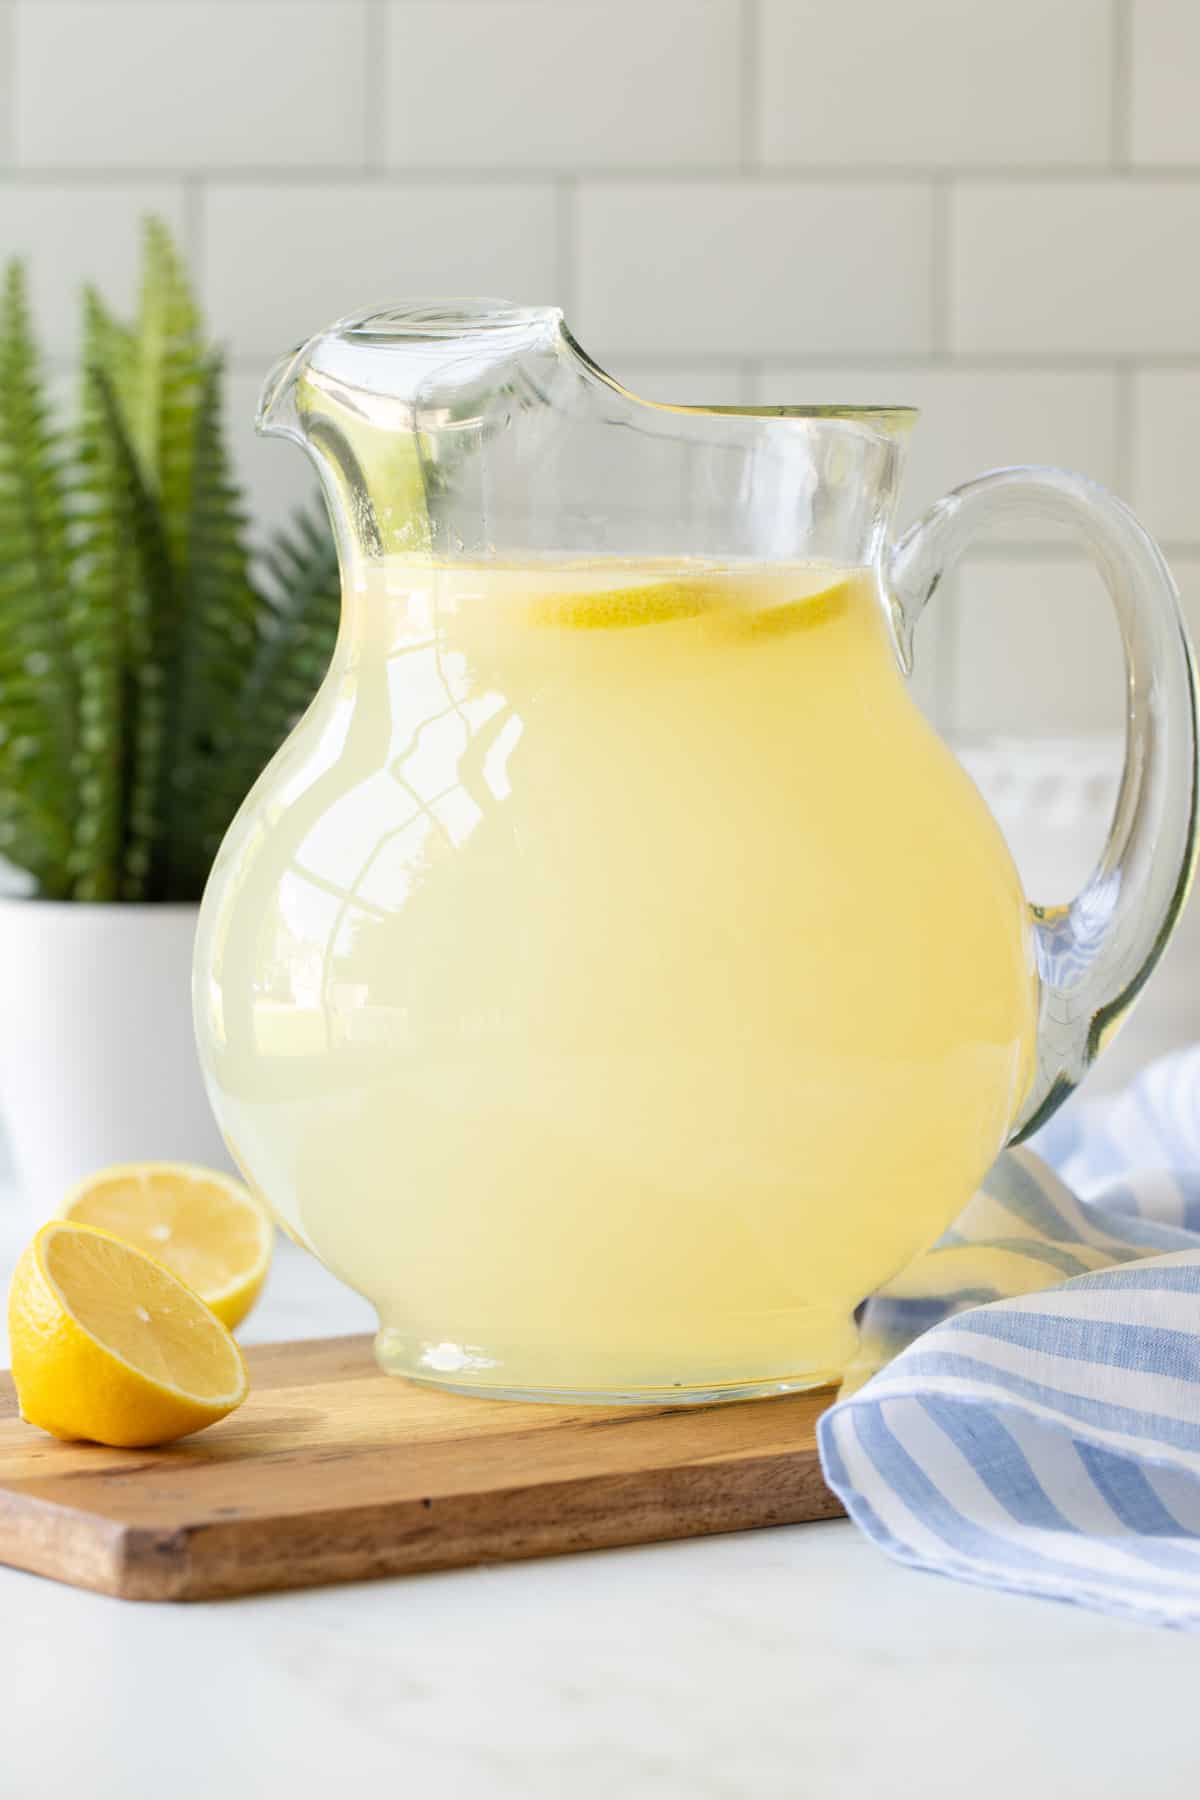 Front view of a glass pitcher of homemade lemonade.